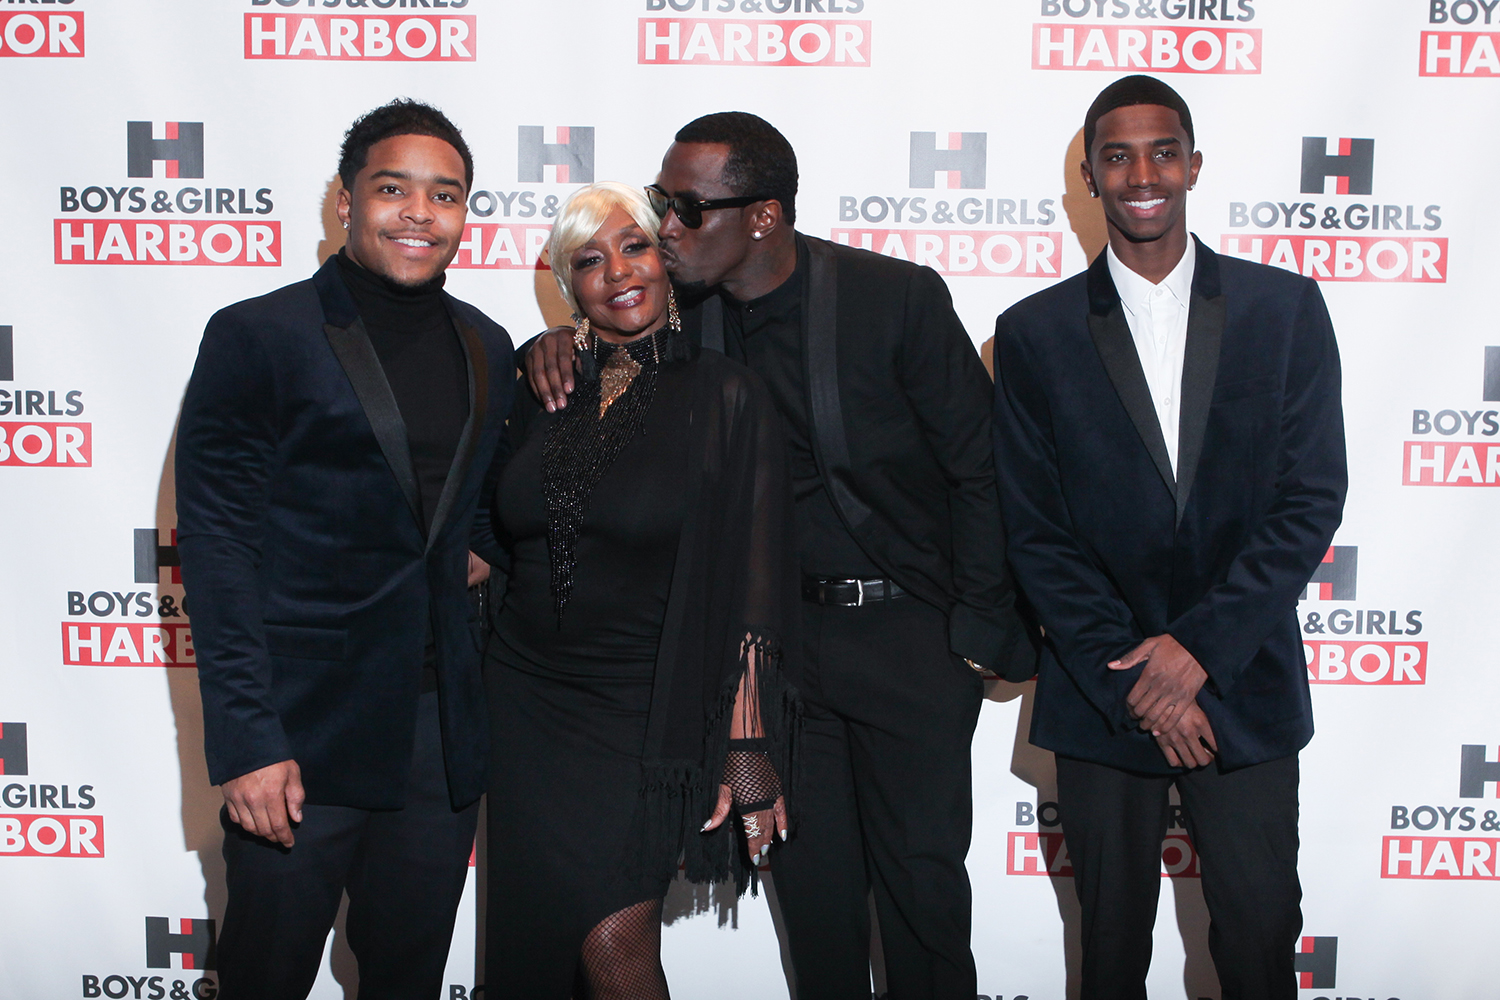 Justin Combs, Janice Combs, Sean Combs, and Christian Combs at the 2016 Harbor Salute: to Achievement Gala. Courtesy of Samantha Nandez BFA.